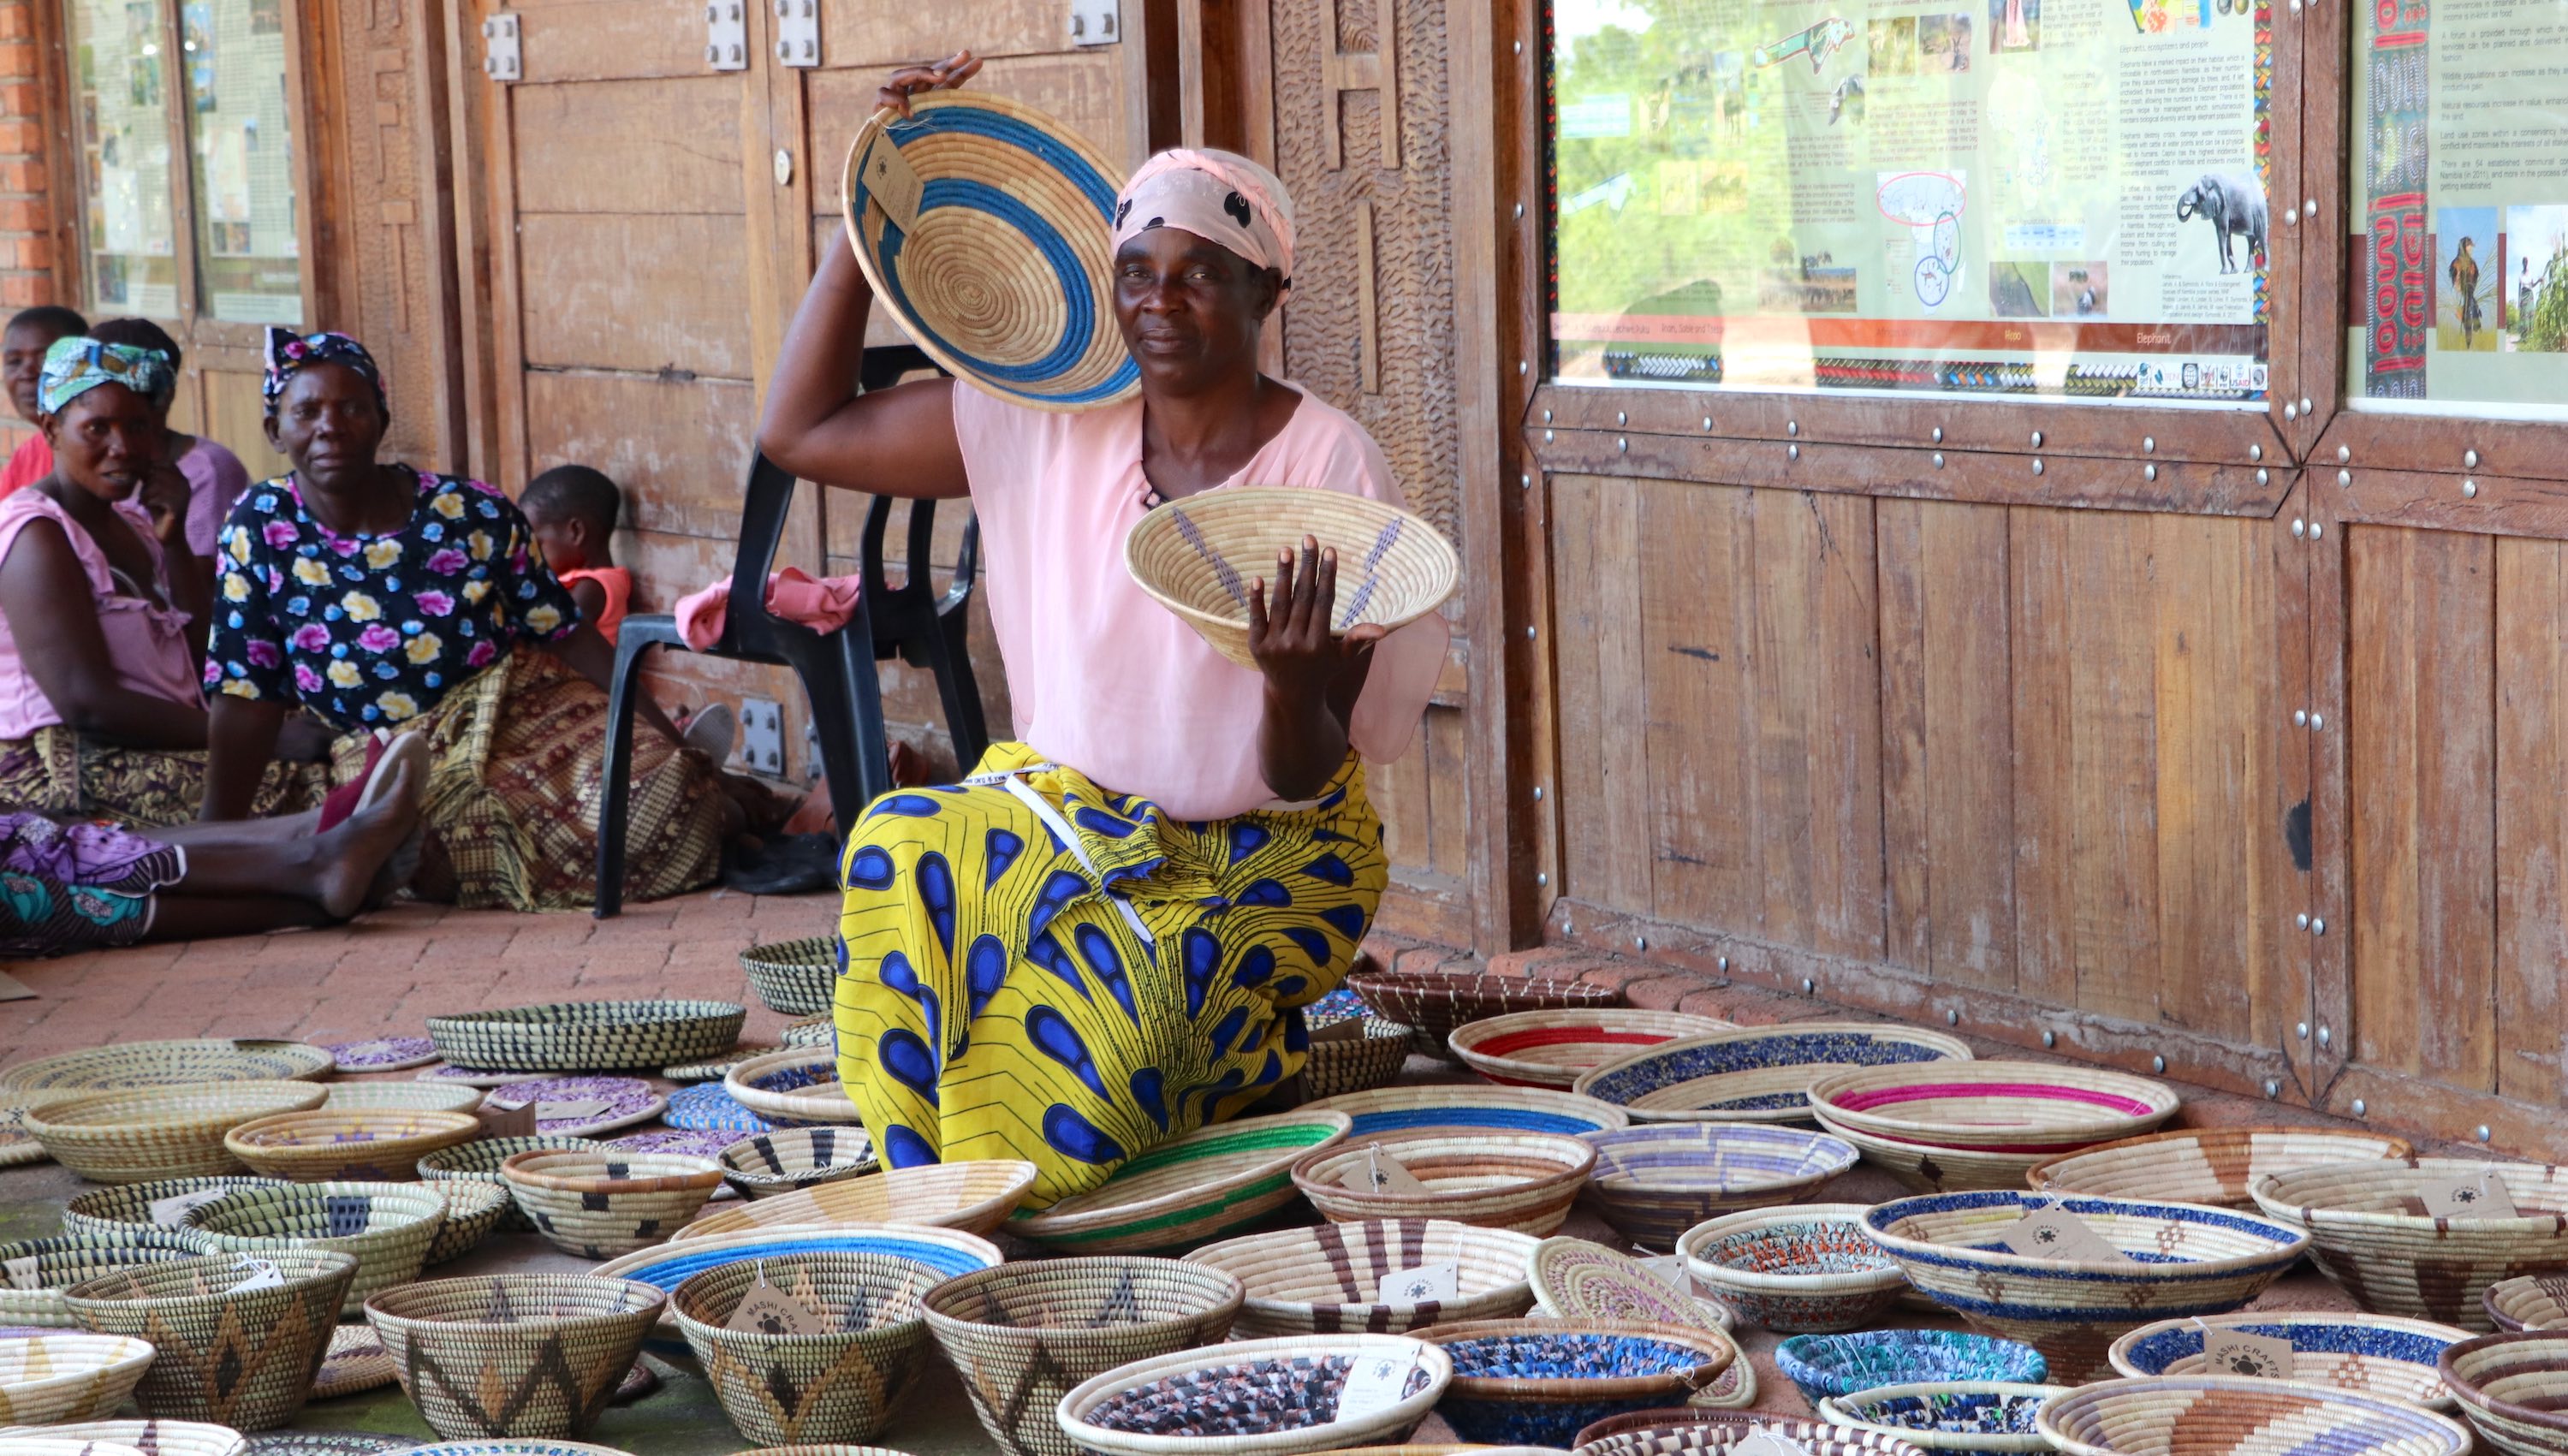 A woman poses with a collection of home-made baskets.